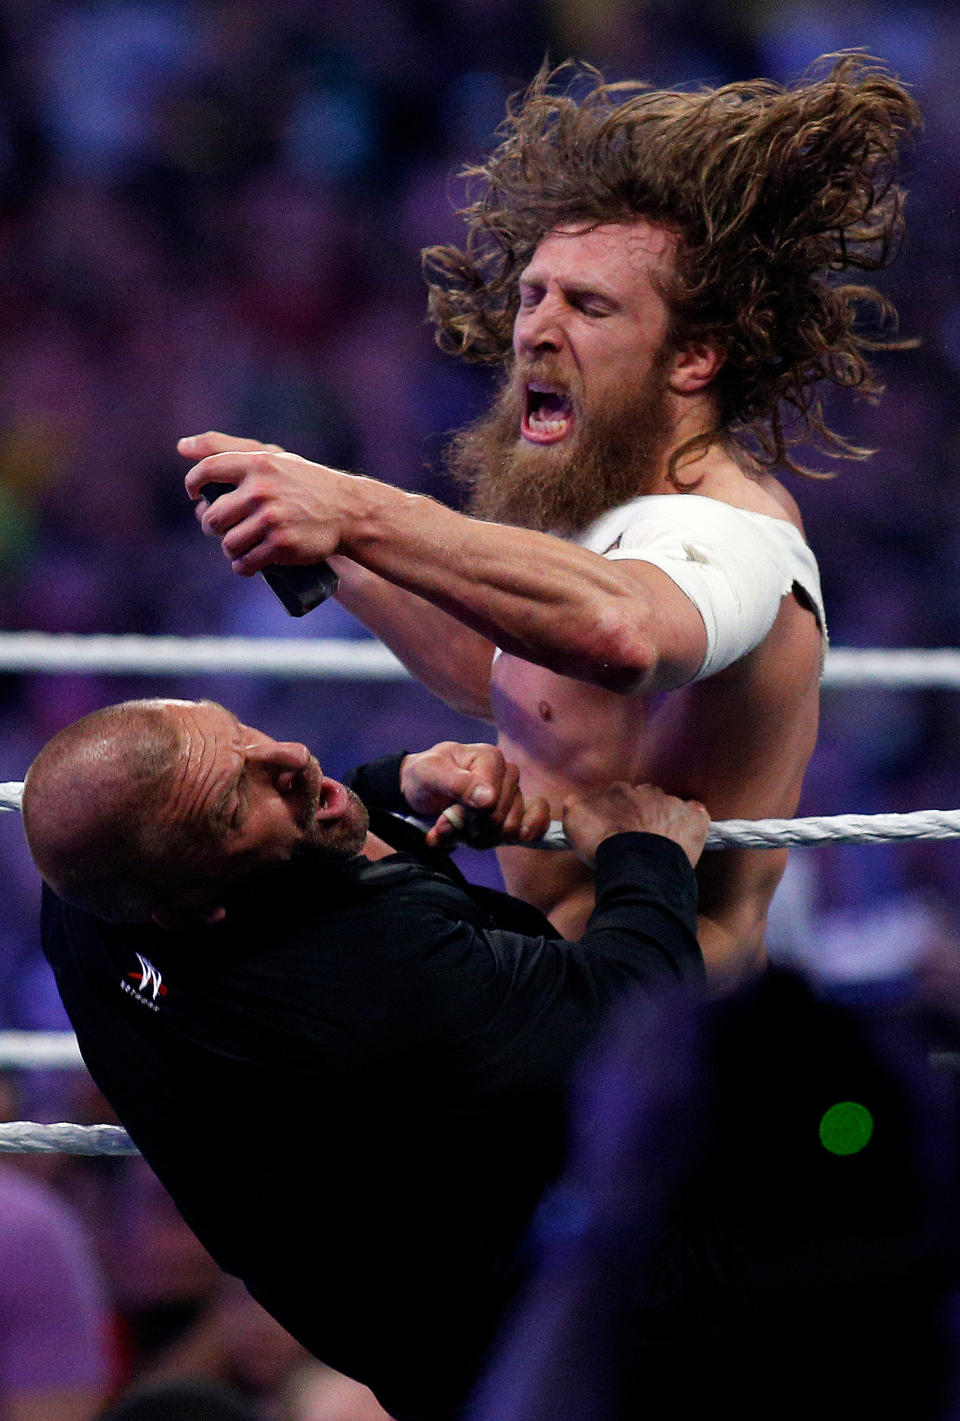 Daniel Bryan, top, hits Triple H with a sledgehammer during Wrestlemania XXX at the Mercedes-Benz Super Dome in New Orleans on Sunday, April 6, 2014. (Jonathan Bachman/AP Images for WWE)